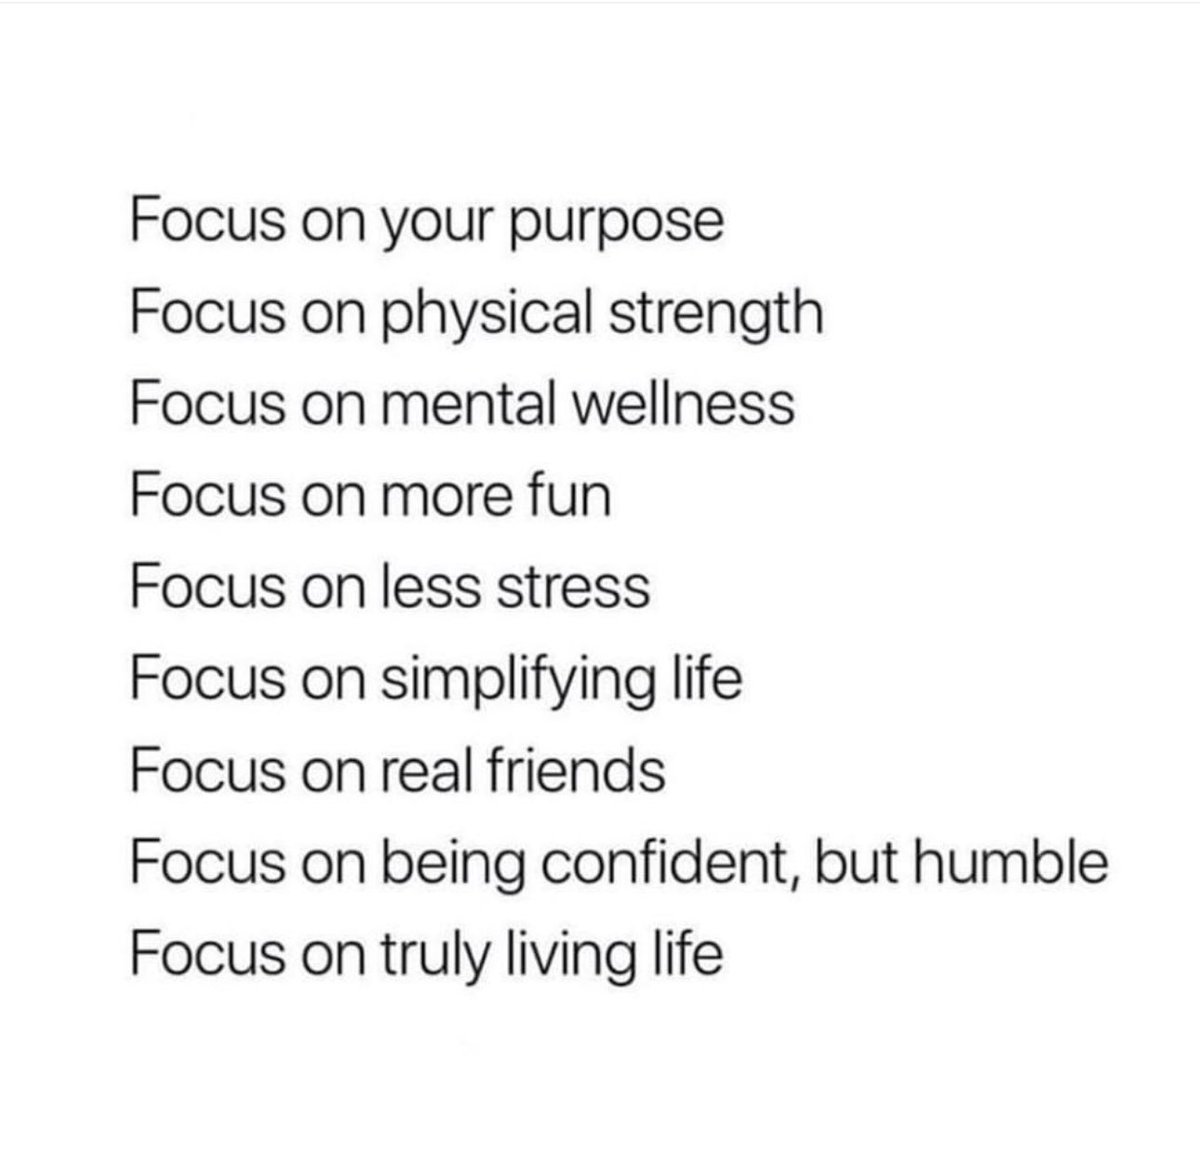 Stay focused 💪🏻💯

#focus #stayfocused #musclemakergrillhouston #fitnessrow #fitfam #fitspo #purpose #physicalstrength #mentalwellness #morefun #lessstress #simplifyinglife #realfriends #beingconfidentbuthumble #trulylivinglife #sundayvibes #goals #gains #mmgsanfelipe #gym #mmg